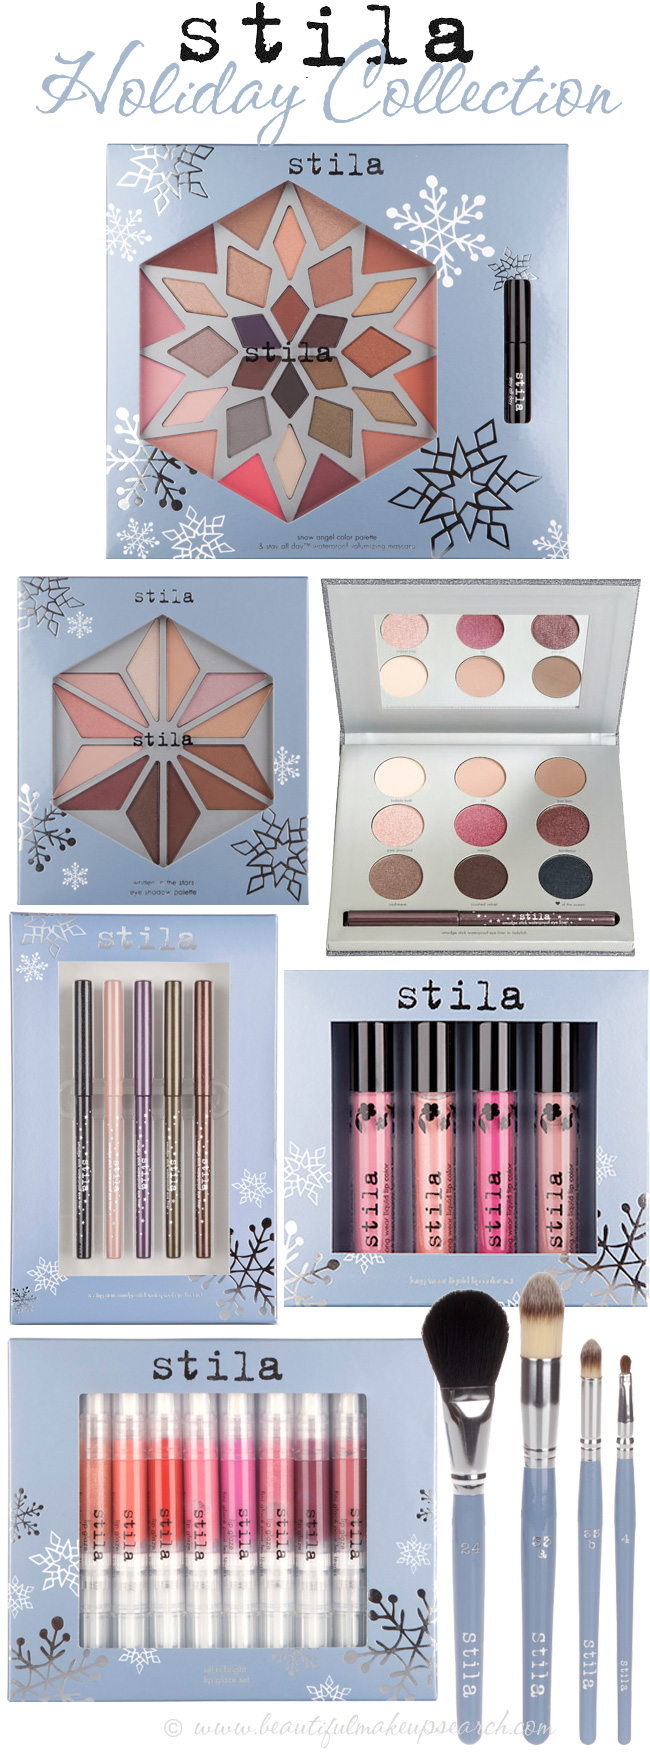 Stila Holiday Collection 2012